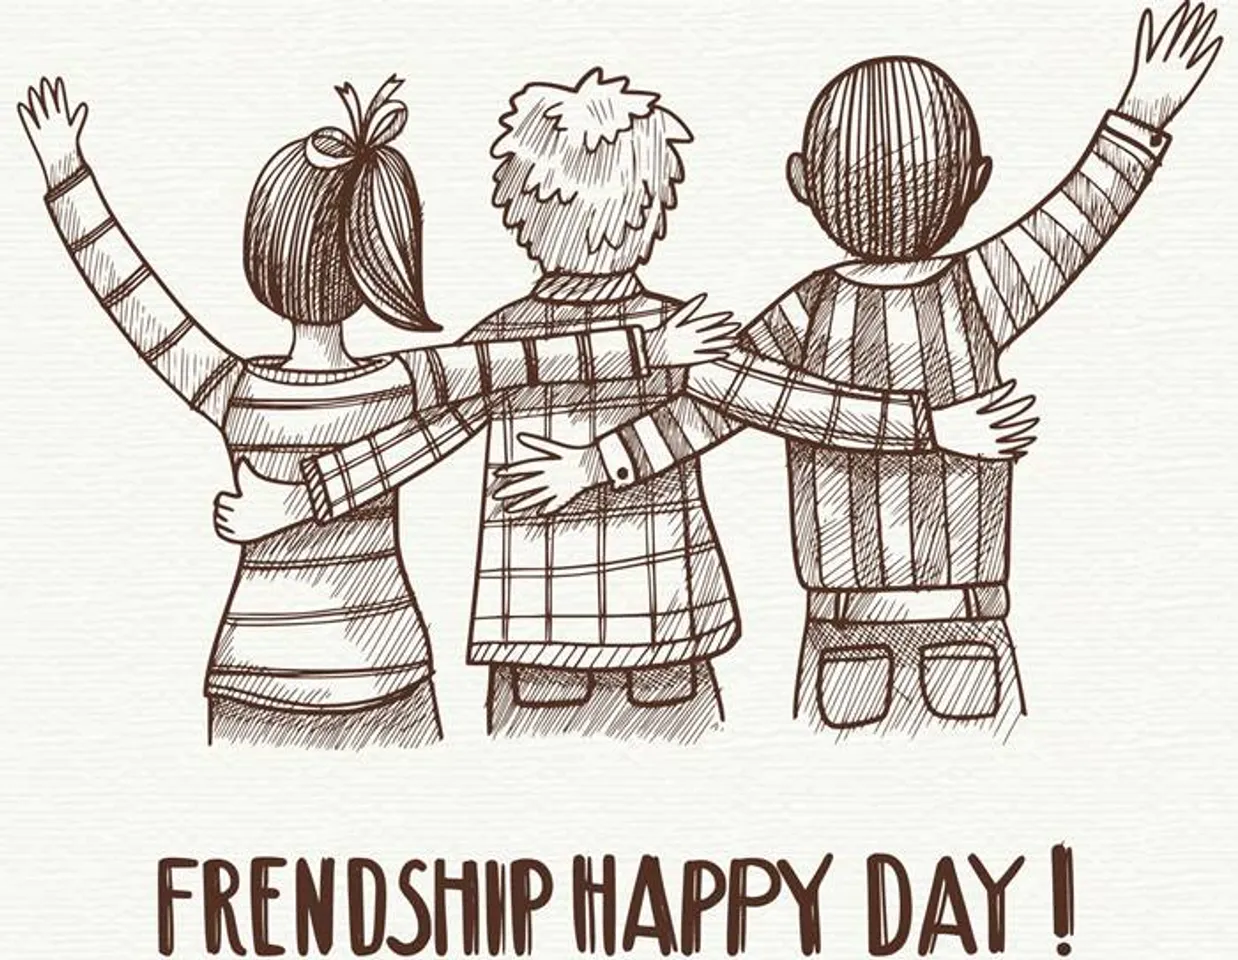 Happy Friendship Day 2019 Wishes Images, Status, Quotes, Messages, Photos